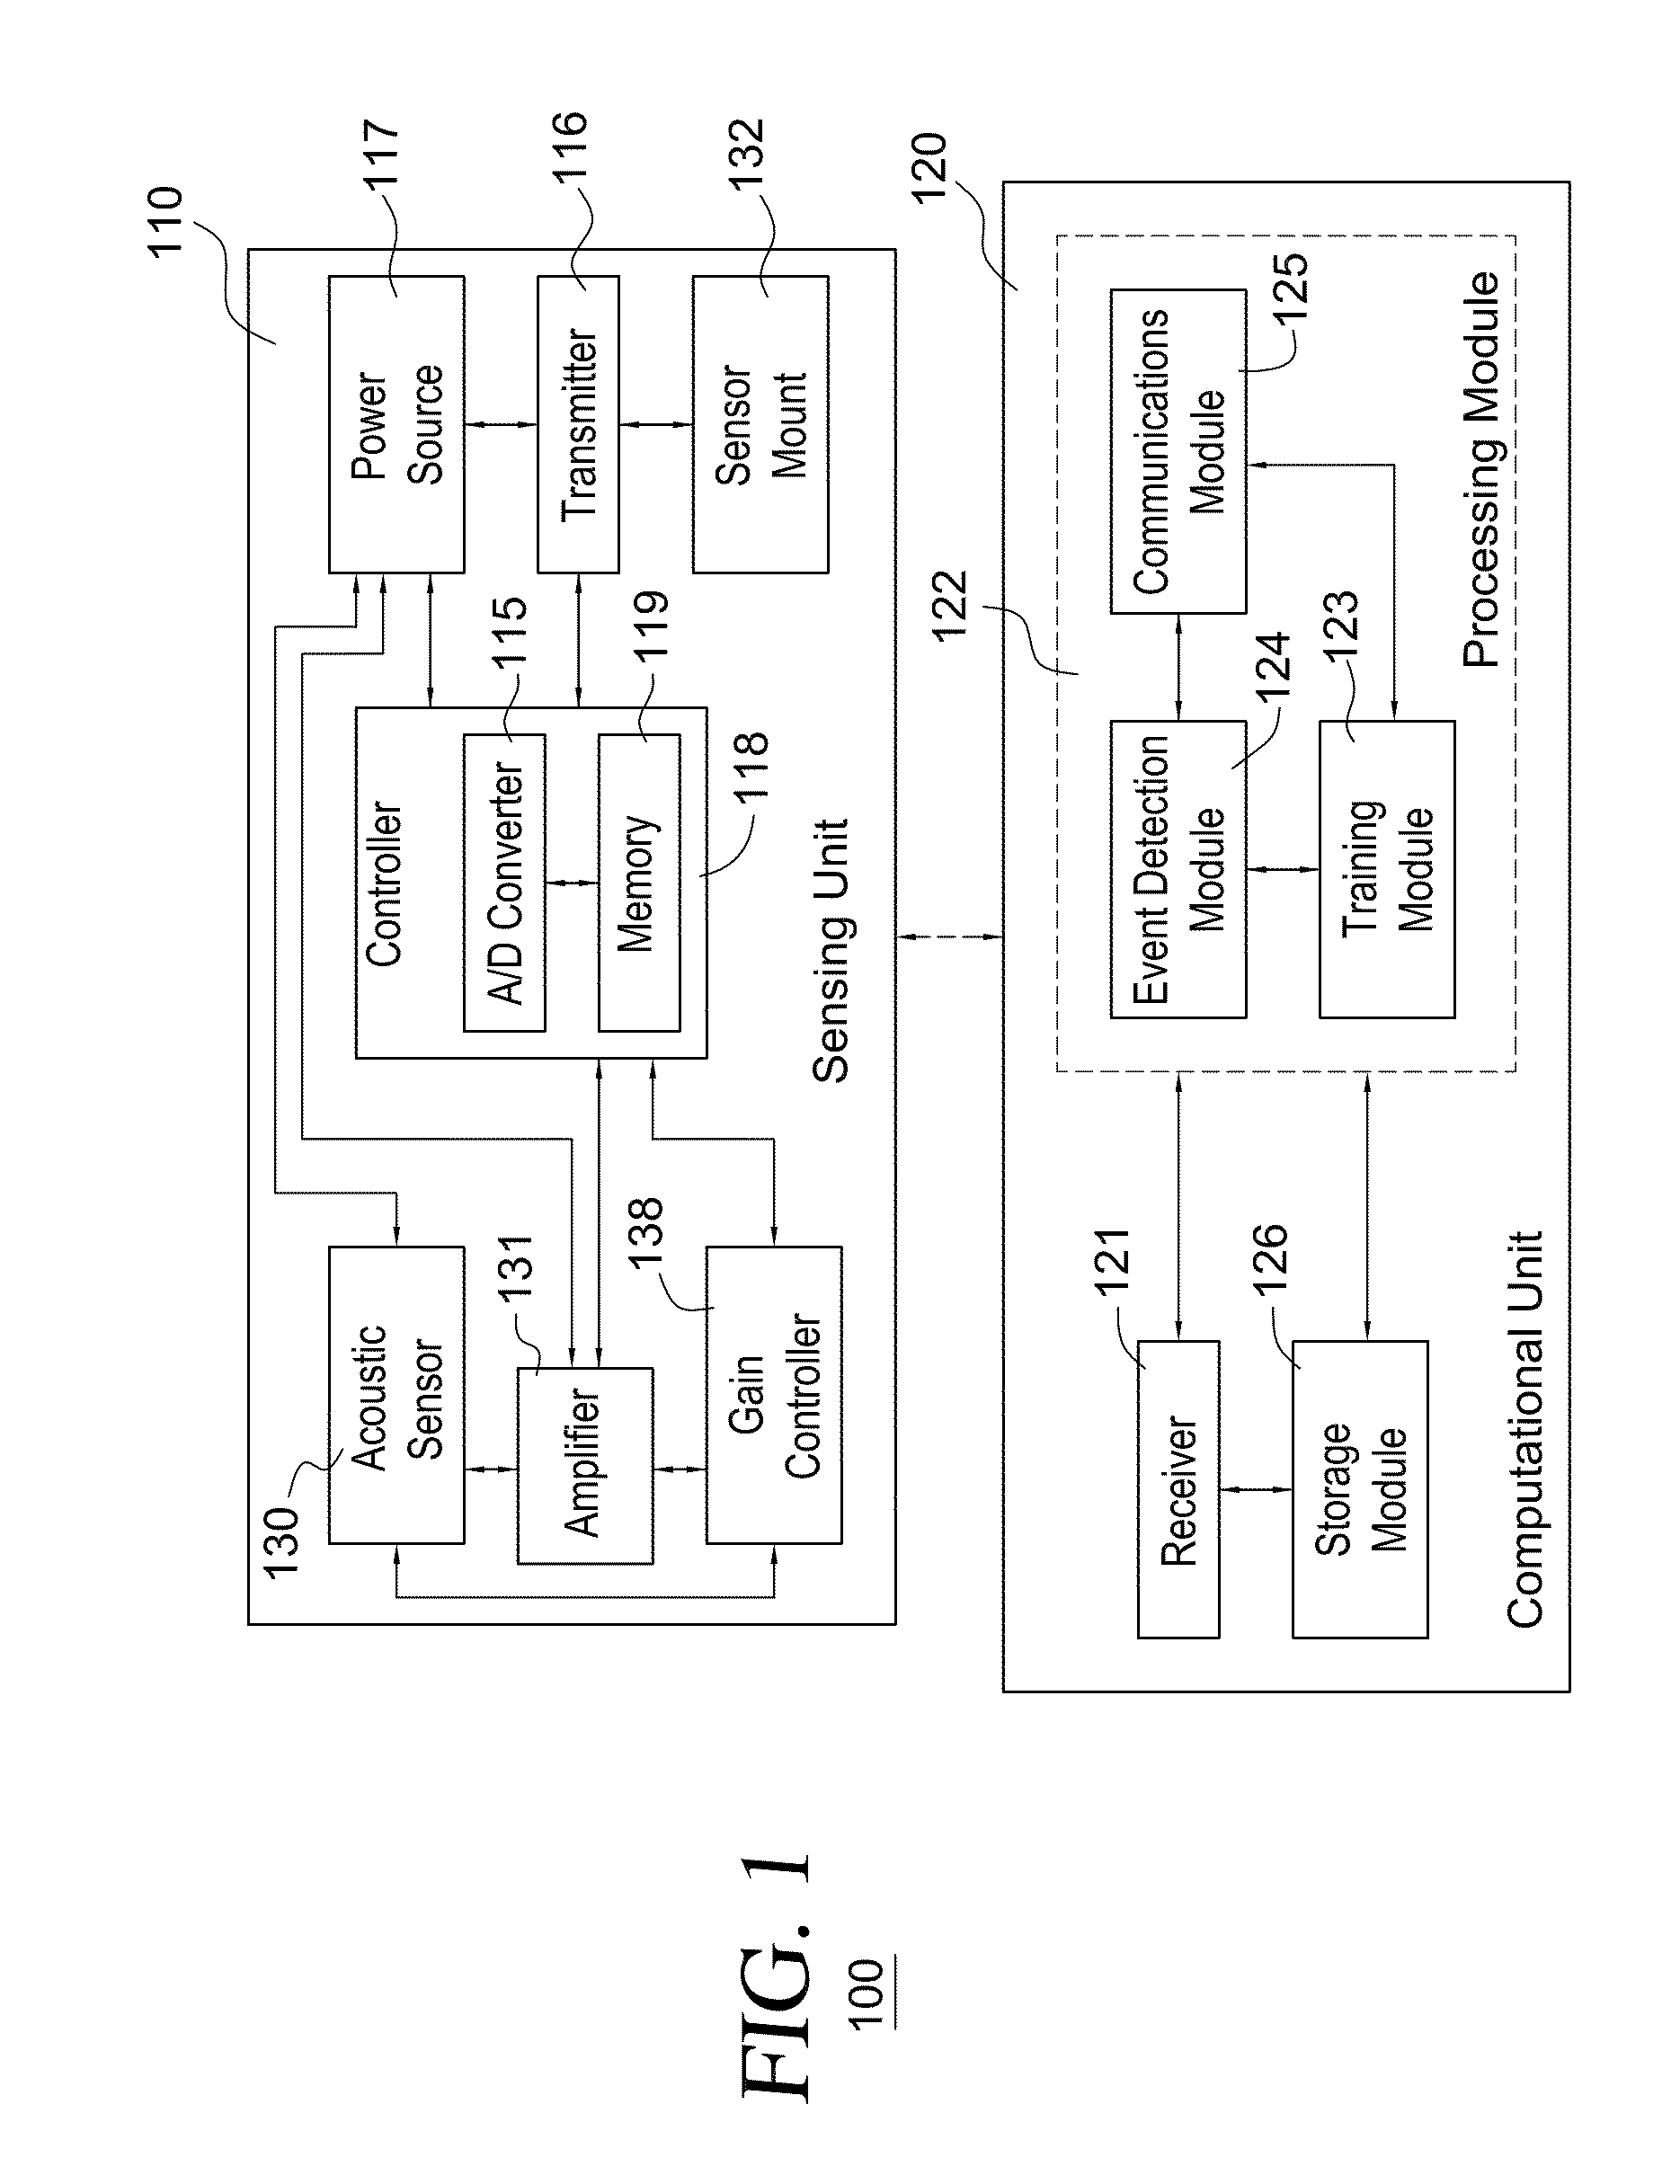 Apparatus Configured to Detect Gas Usage, Method of Providing Same, and Method of Detecting Gas Usage